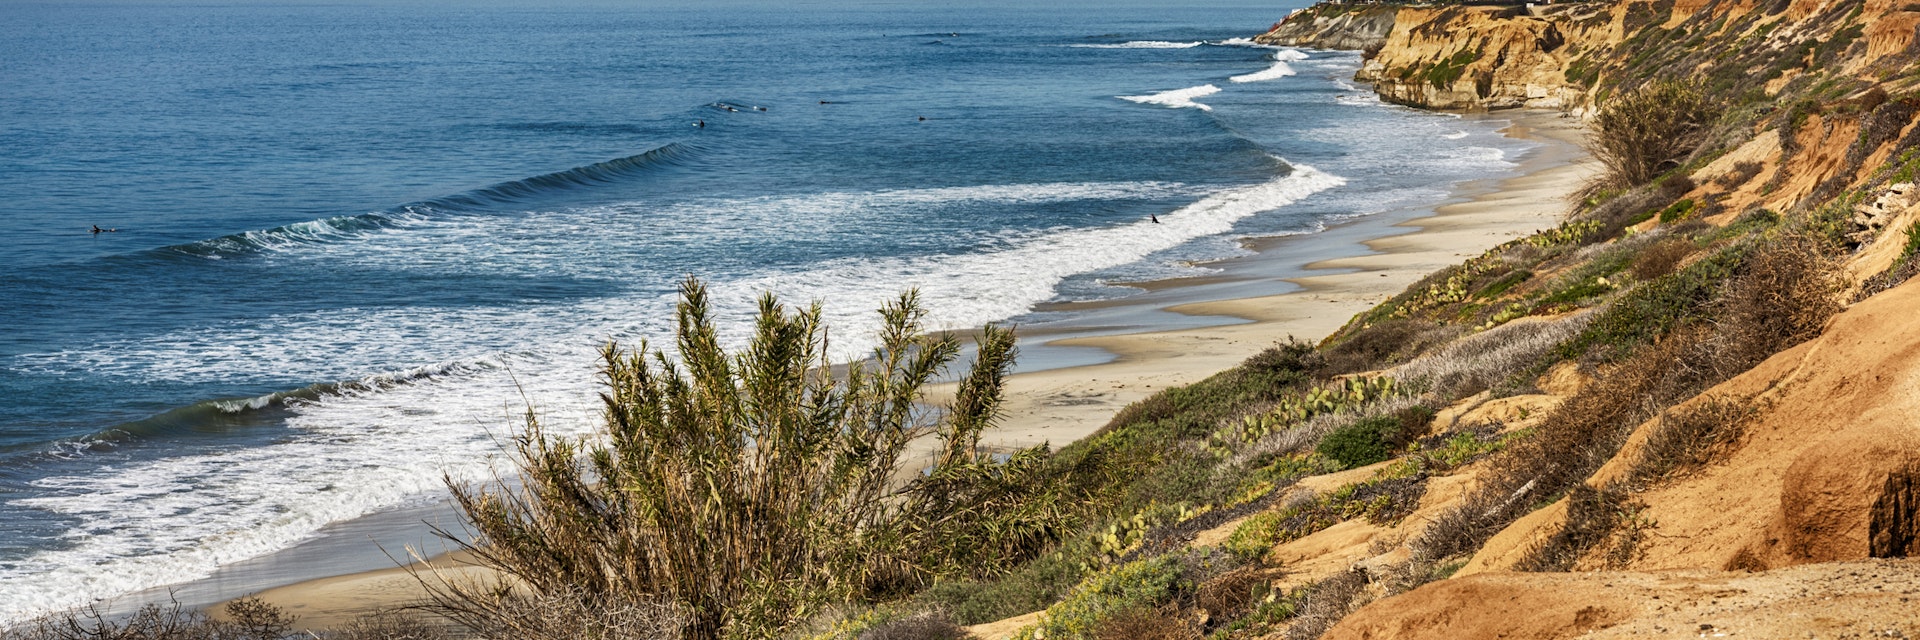 Stretch of beach in the northern portion of coastal San Diego County in the city of Carlsbad.
1169181689